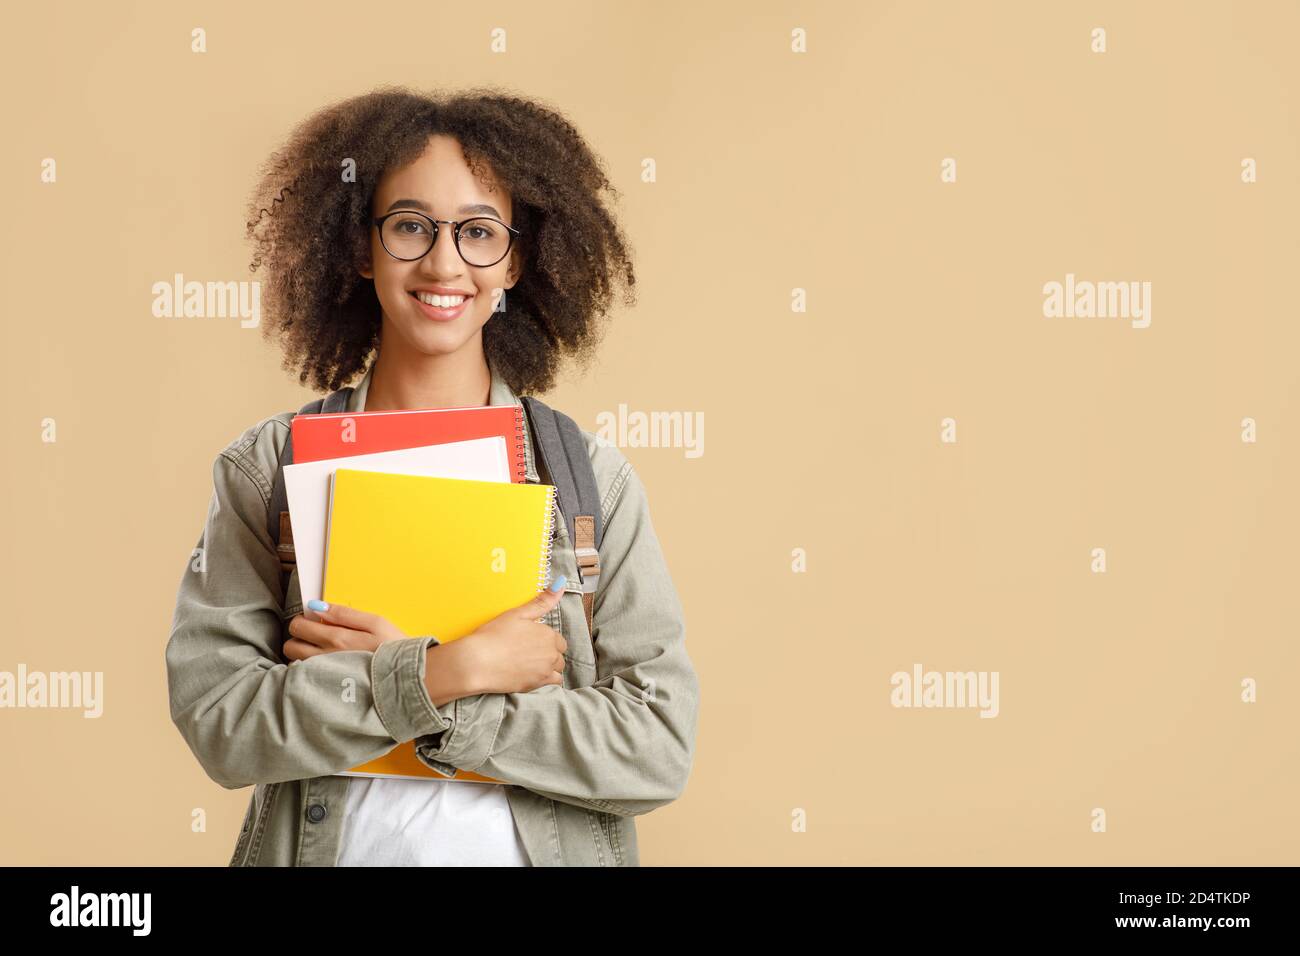 Preparation for lessons. Studio shot of glad african american female student in glasses with notepads, looks at camera, isolated on light background Stock Photo